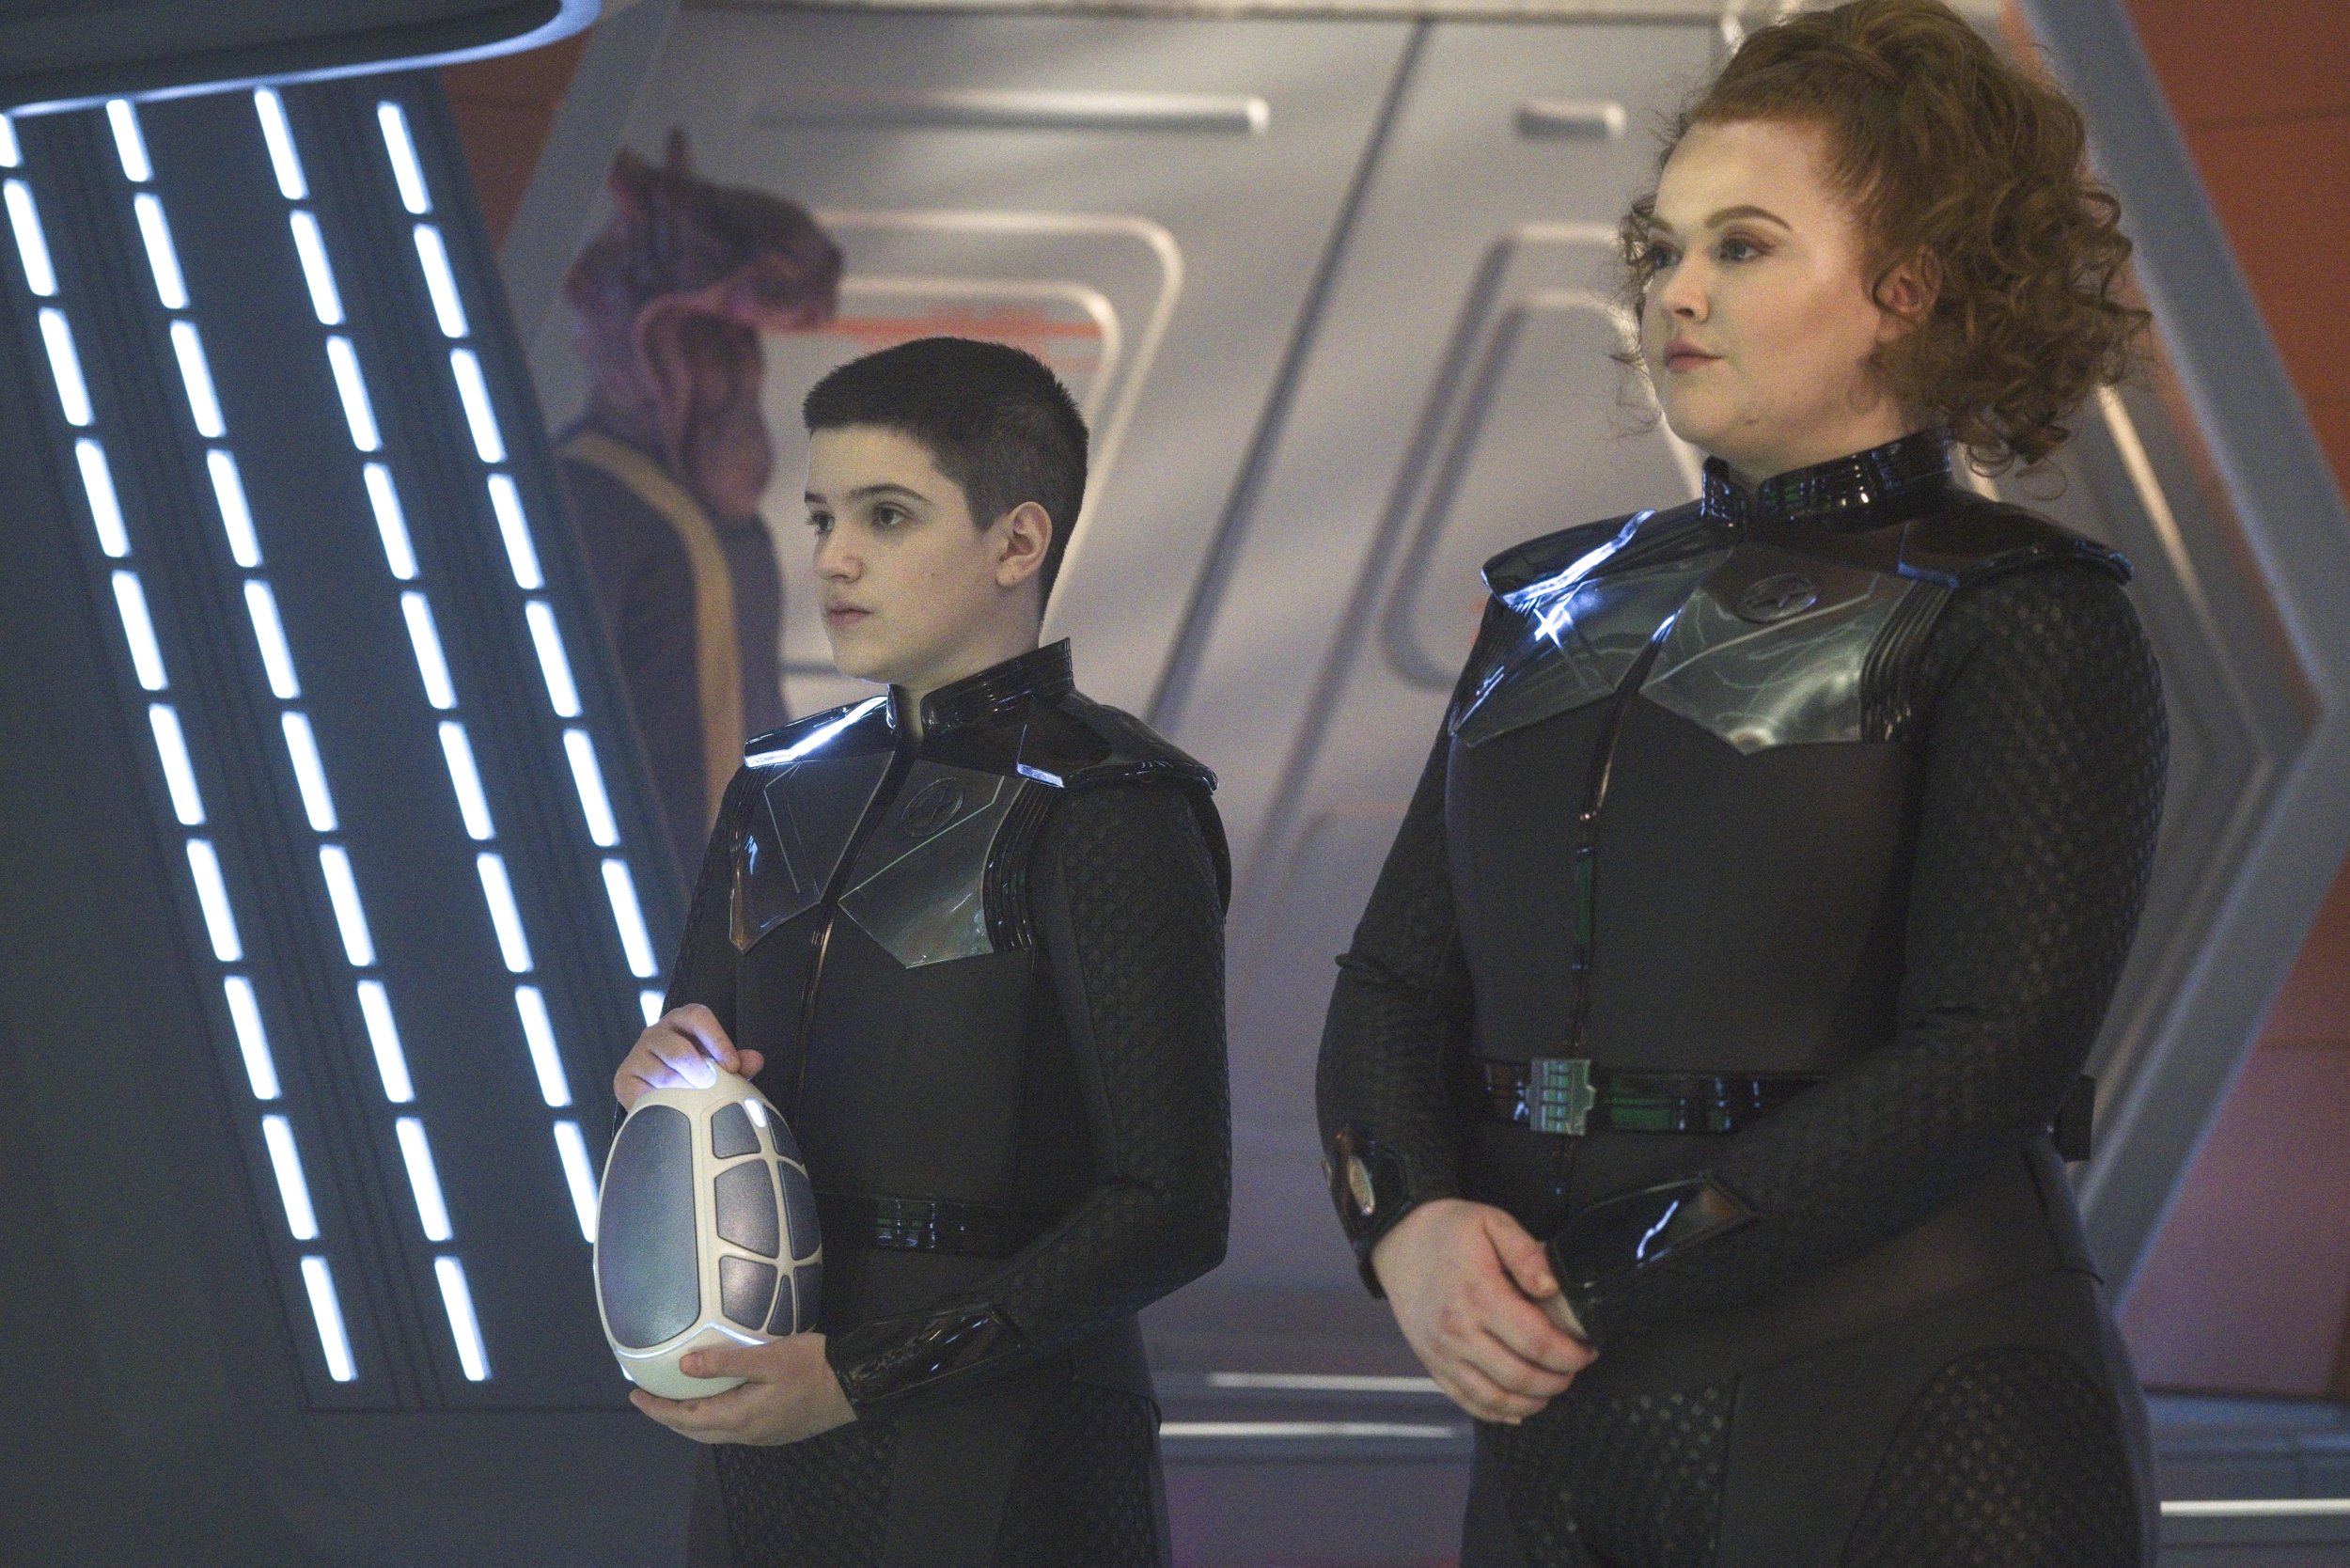   Pictured: Blu del Barrio as Adira and Mary Wiseman as Tilly of the Paramount+ original series STAR TREK: DISCOVERY. Photo Cr: Michael Gibson/ViacomCBS © 2021 ViacomCBS. All Rights Reserved.  